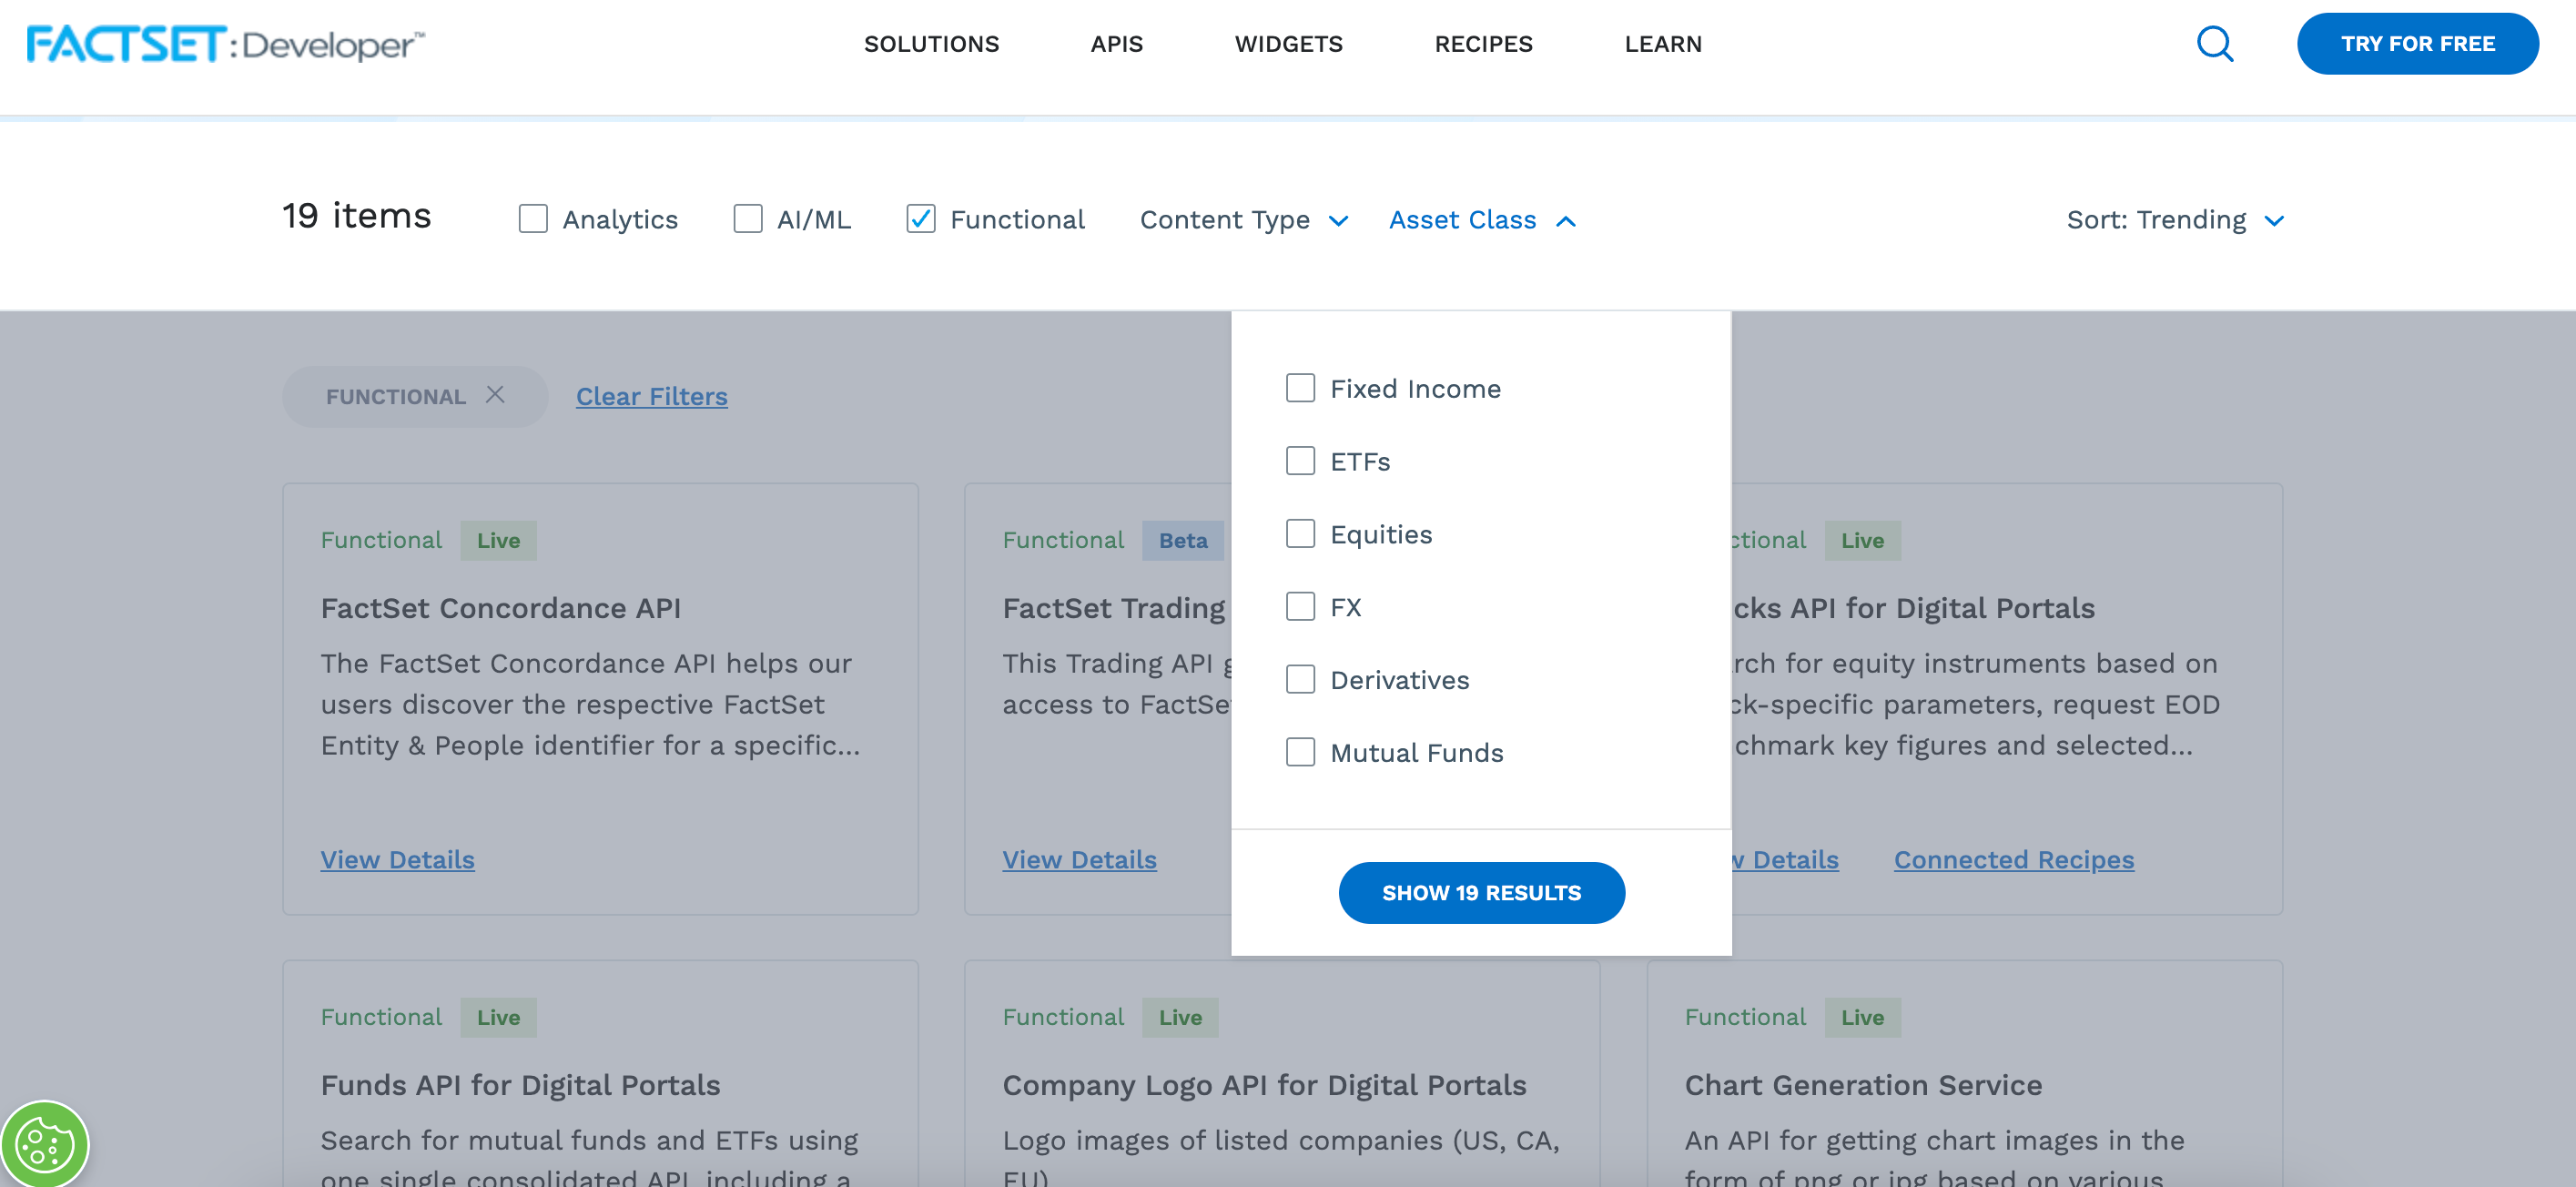 FactSet's API catalog has many options to filter the products like "Content Type" or "Asset Class"